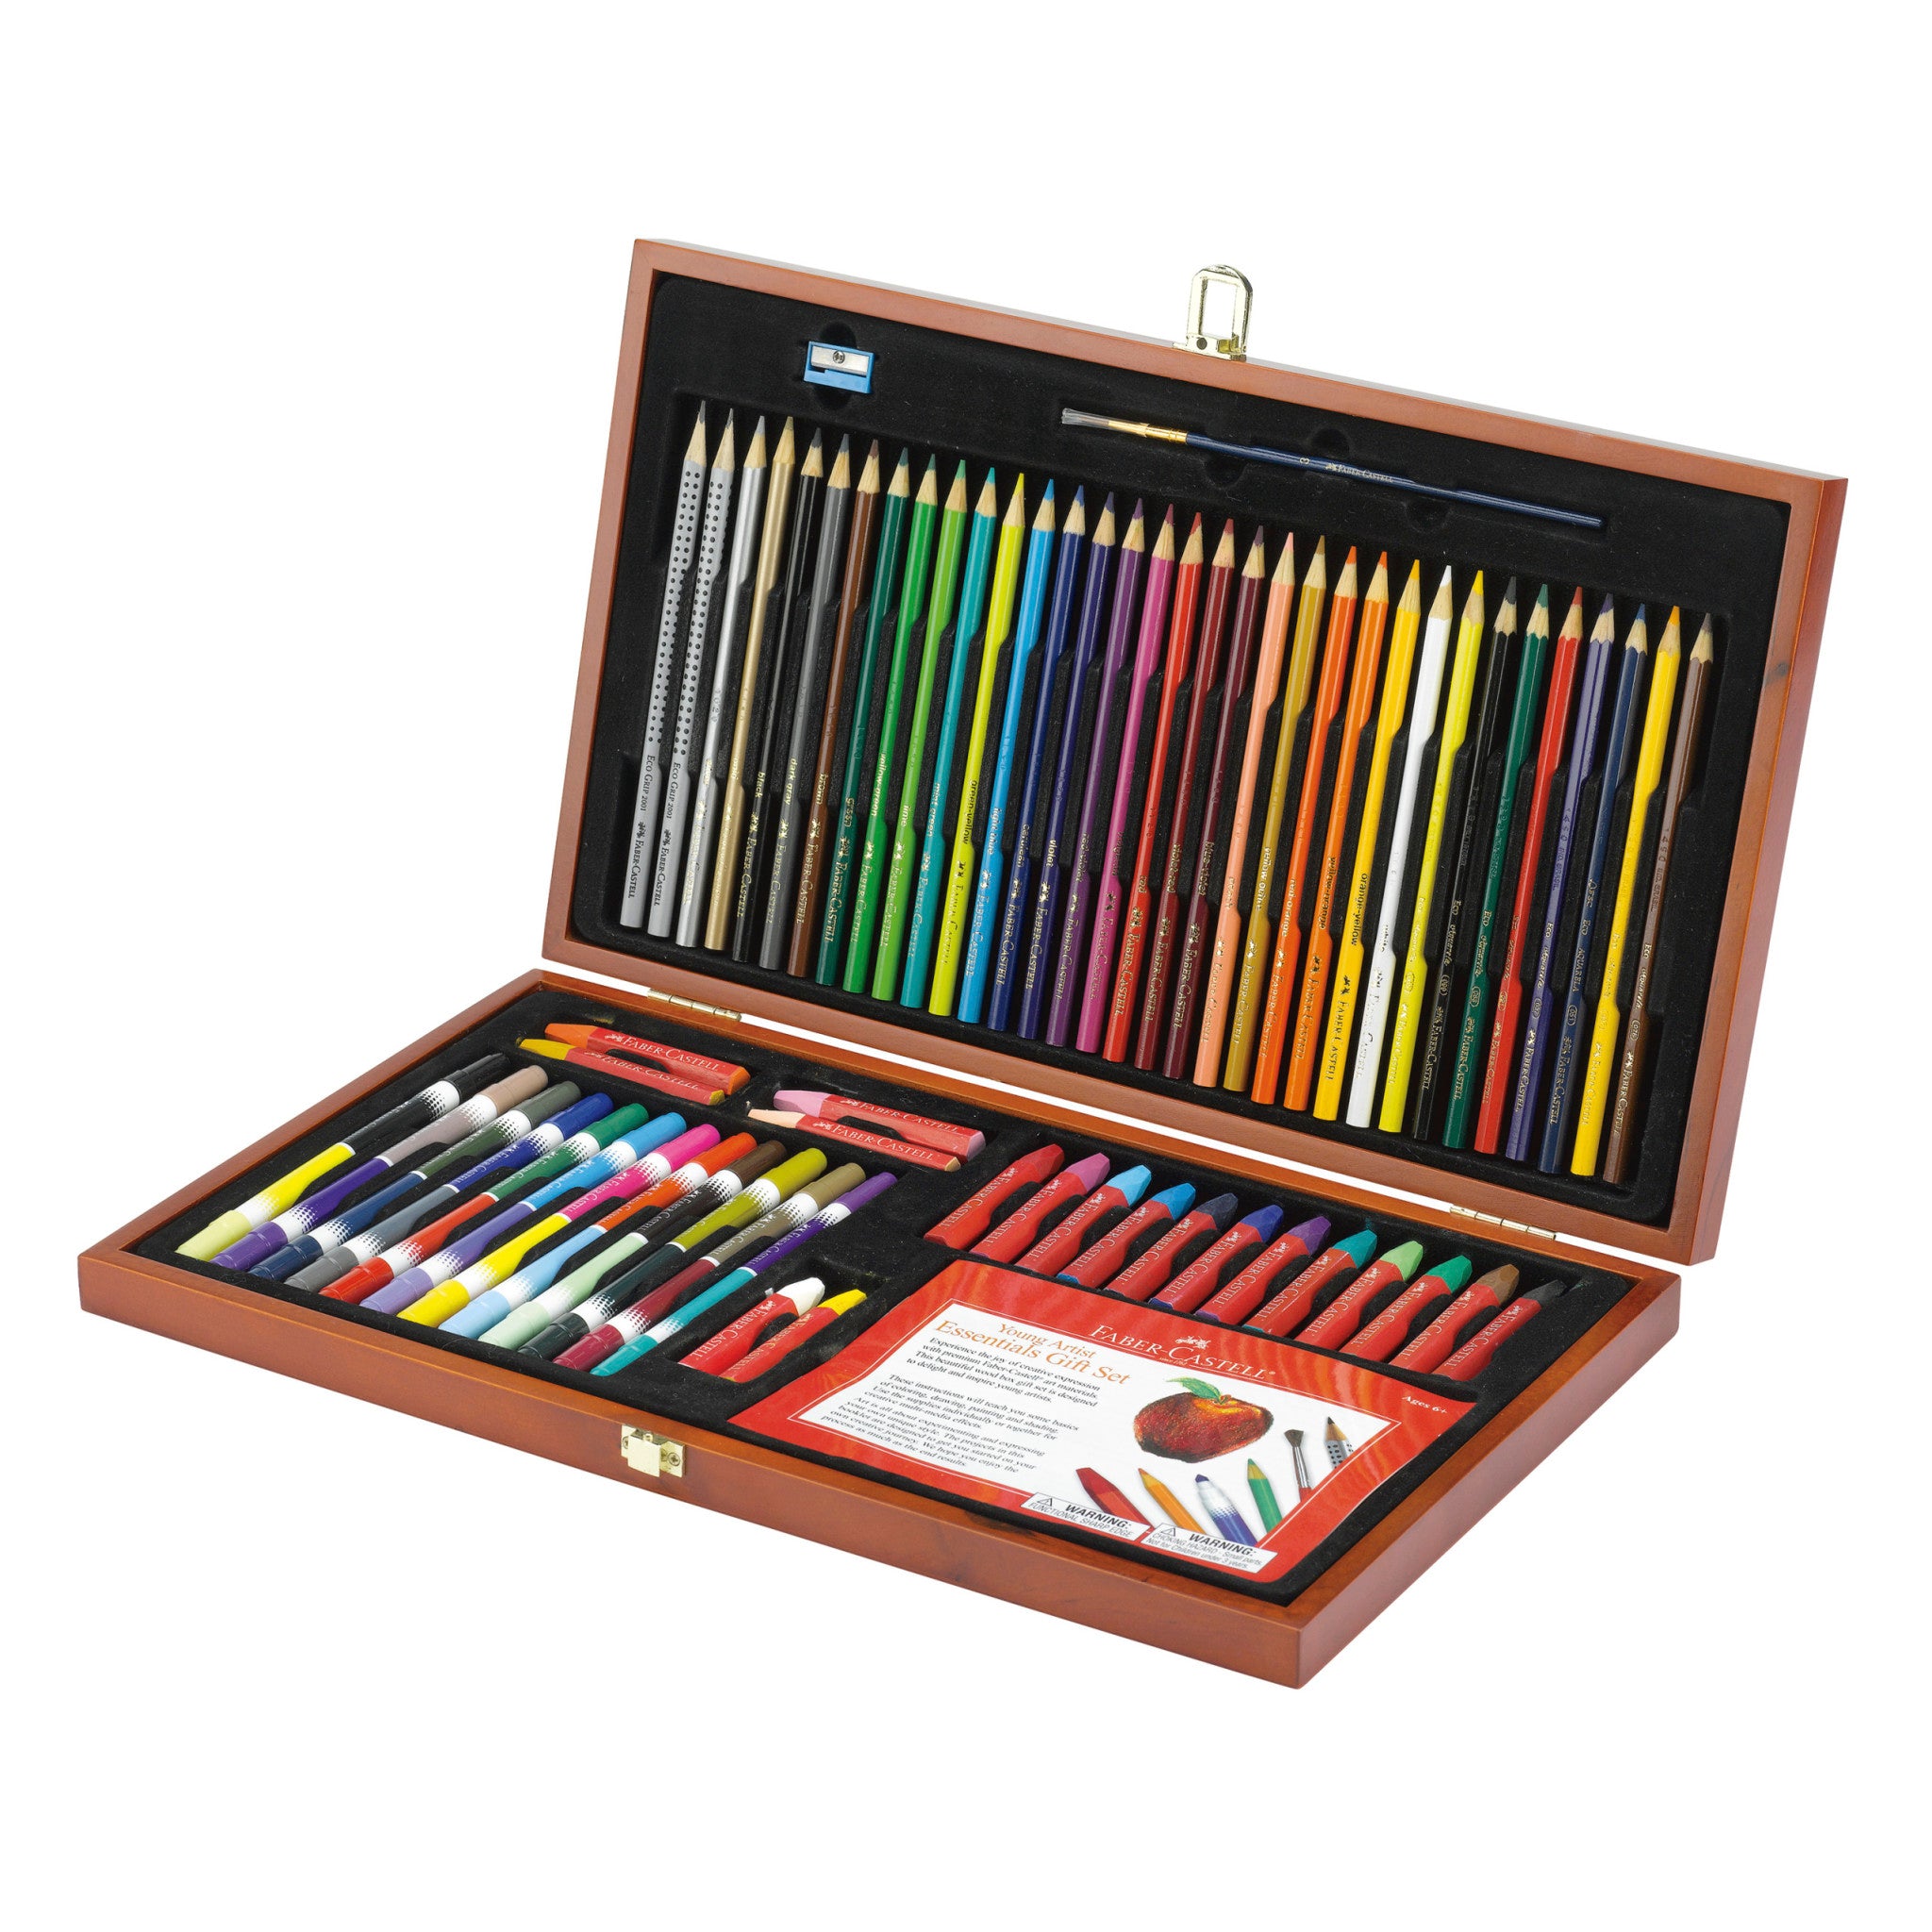 The Very Best Gifts for Teenage Artists - Art Supplies for Teens